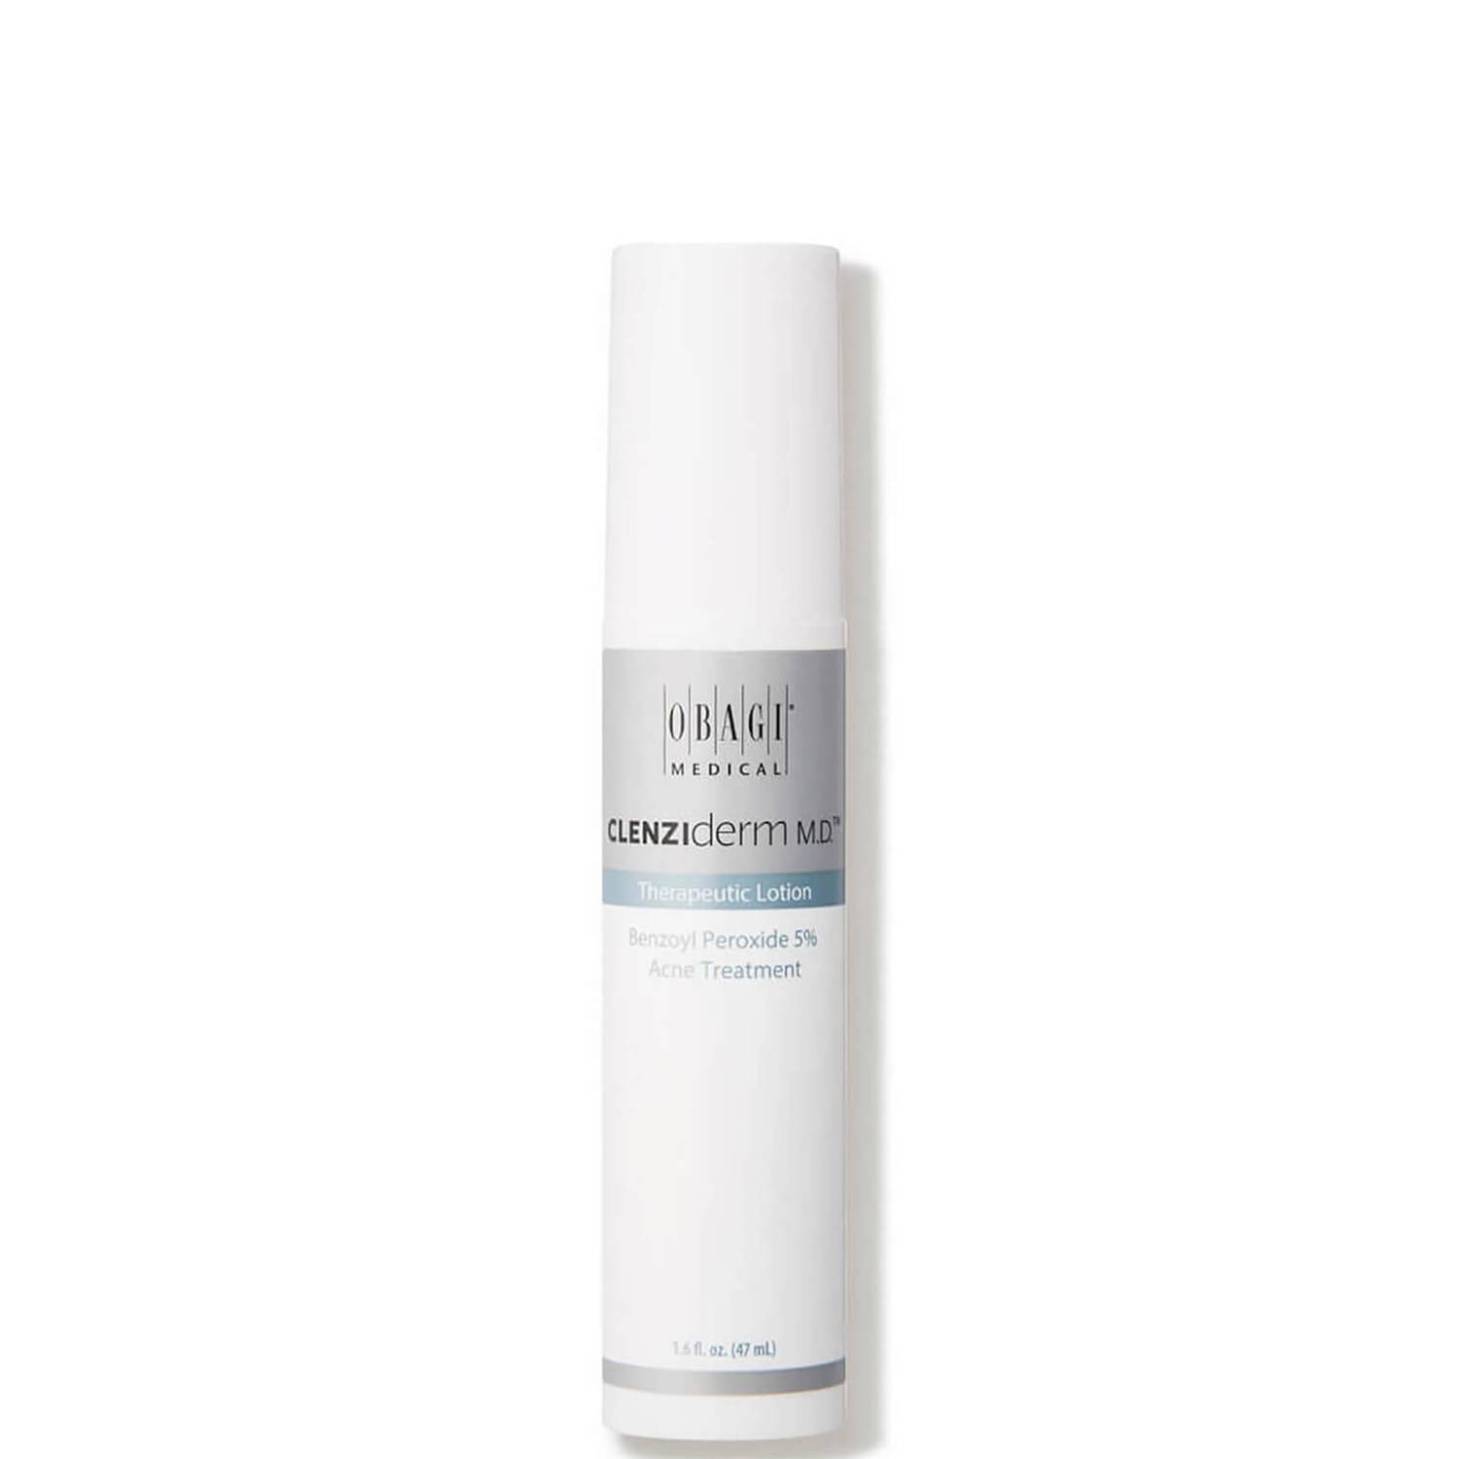 Obagi medical clenziderm md therapeutic moisturizer for dry skin